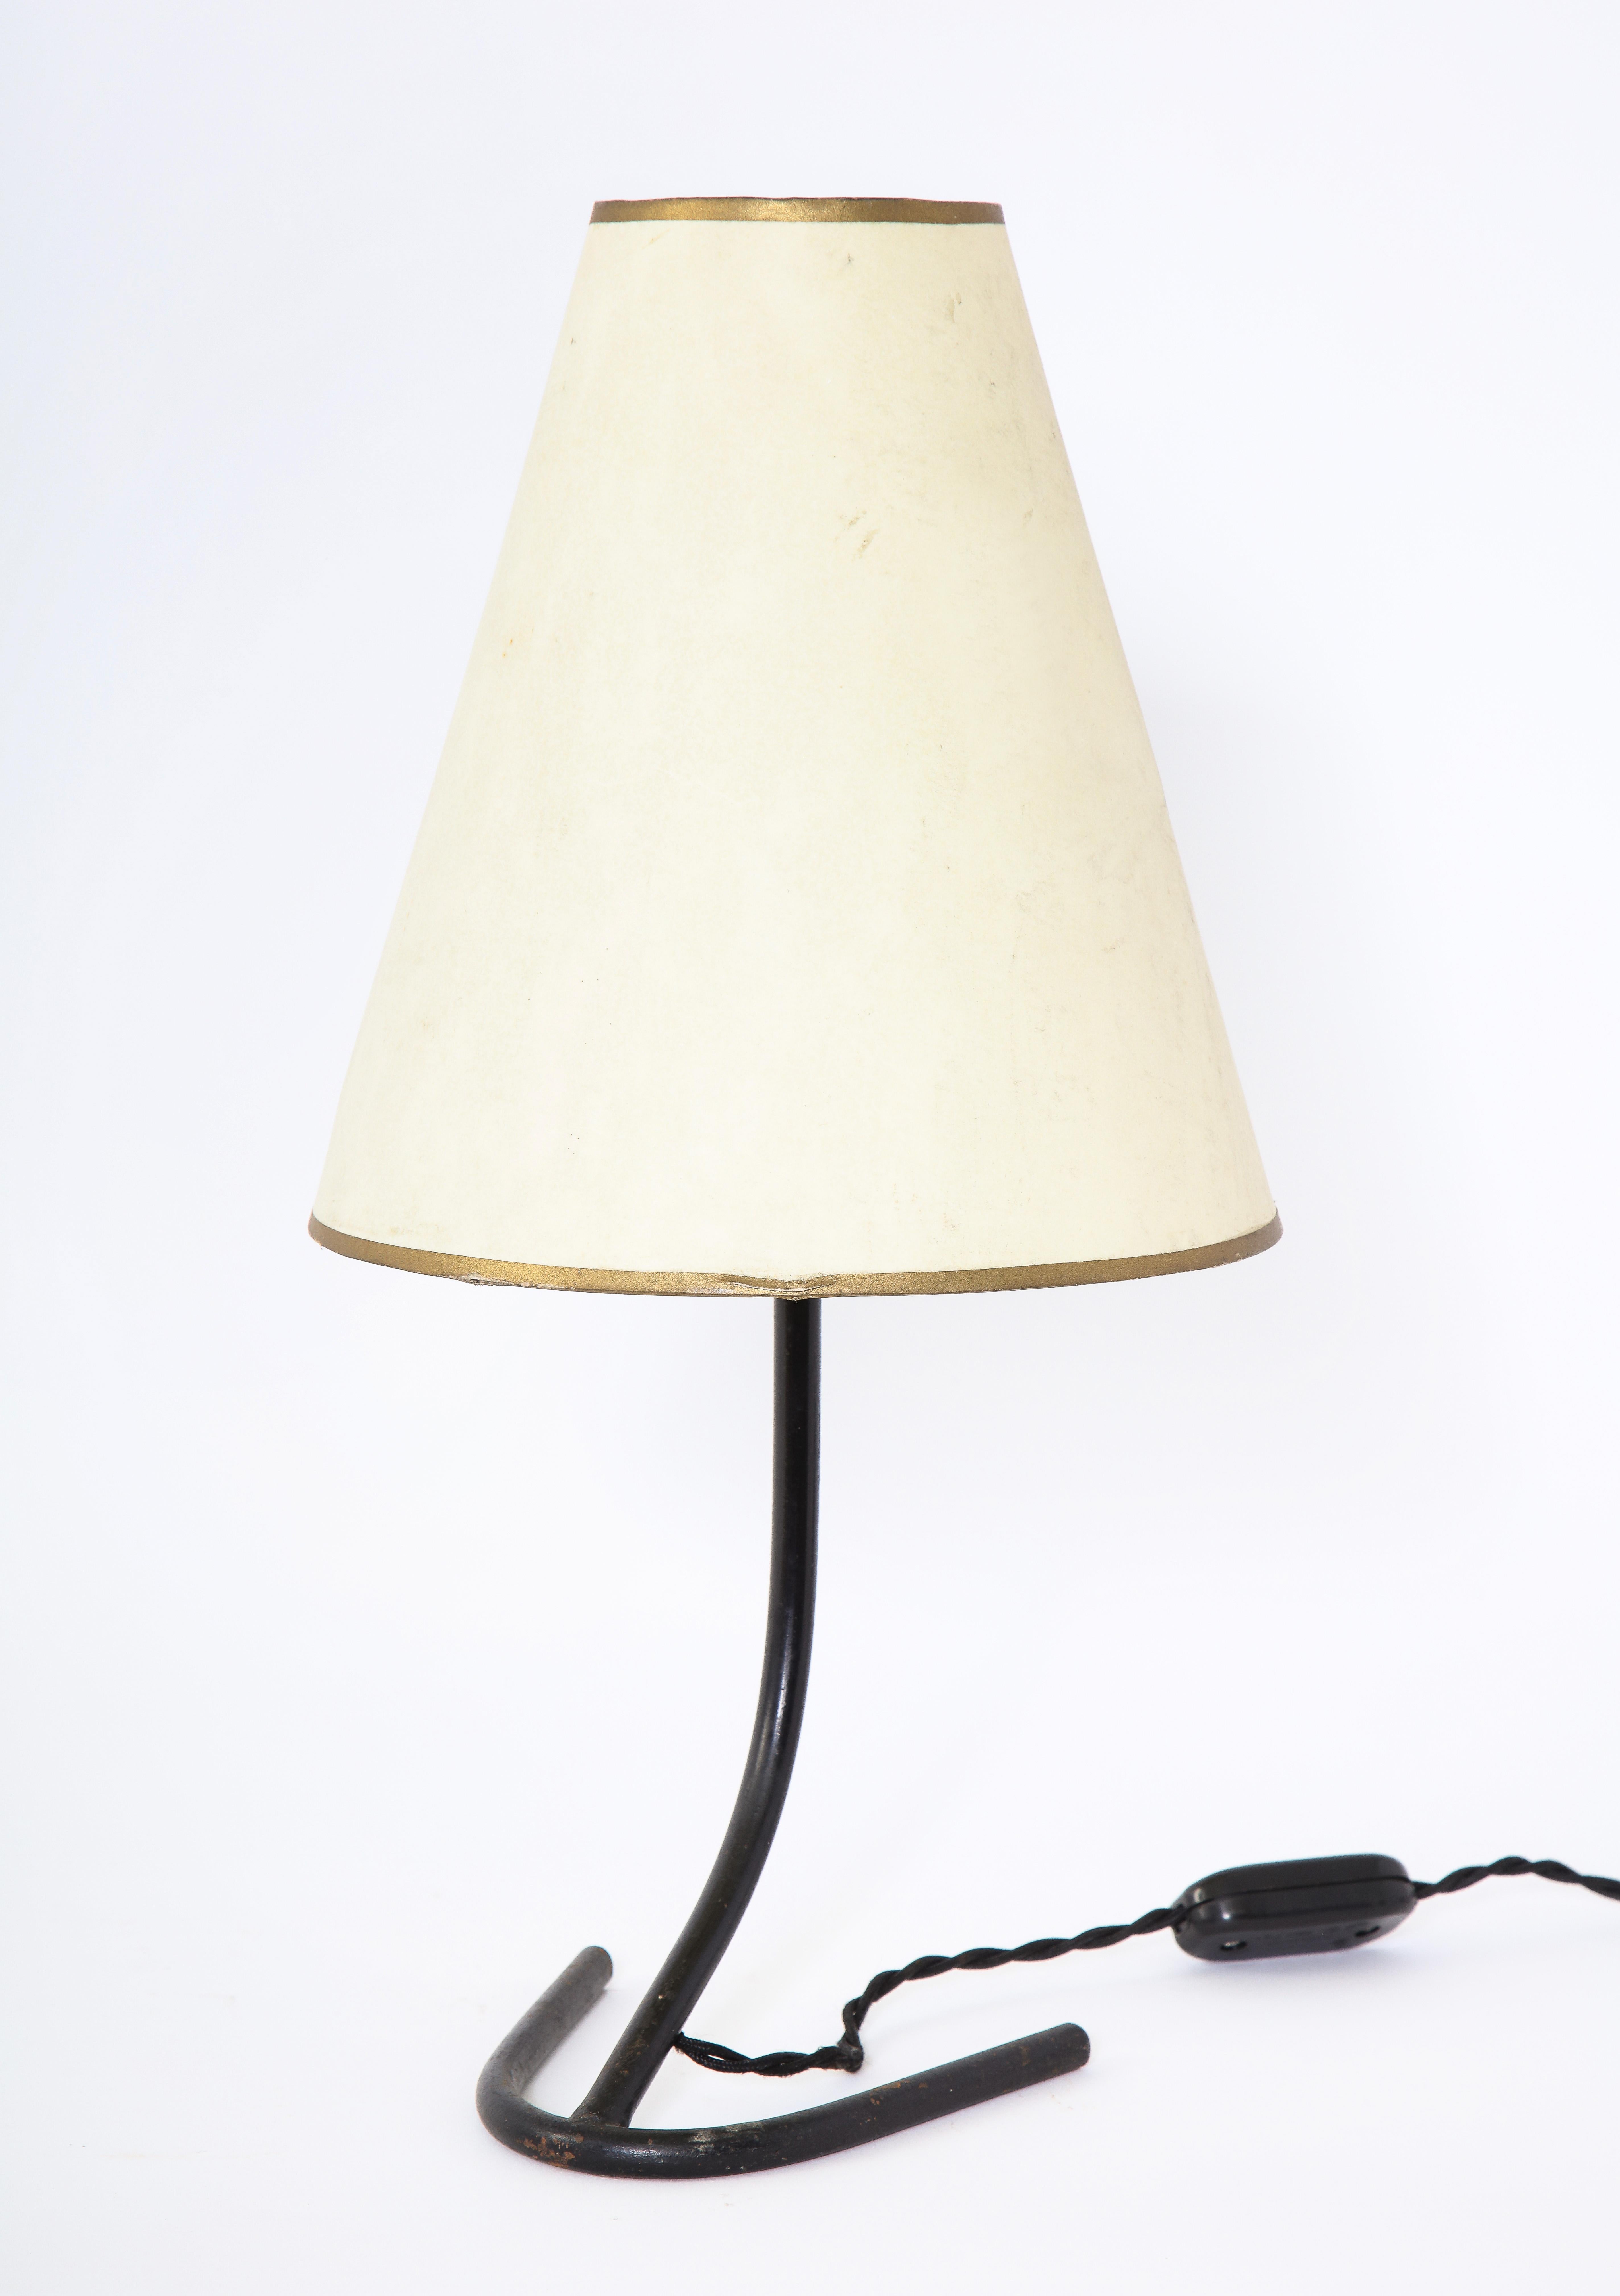 A diminutive bedside or desk lamp in blackened wrought iron. Rewired.